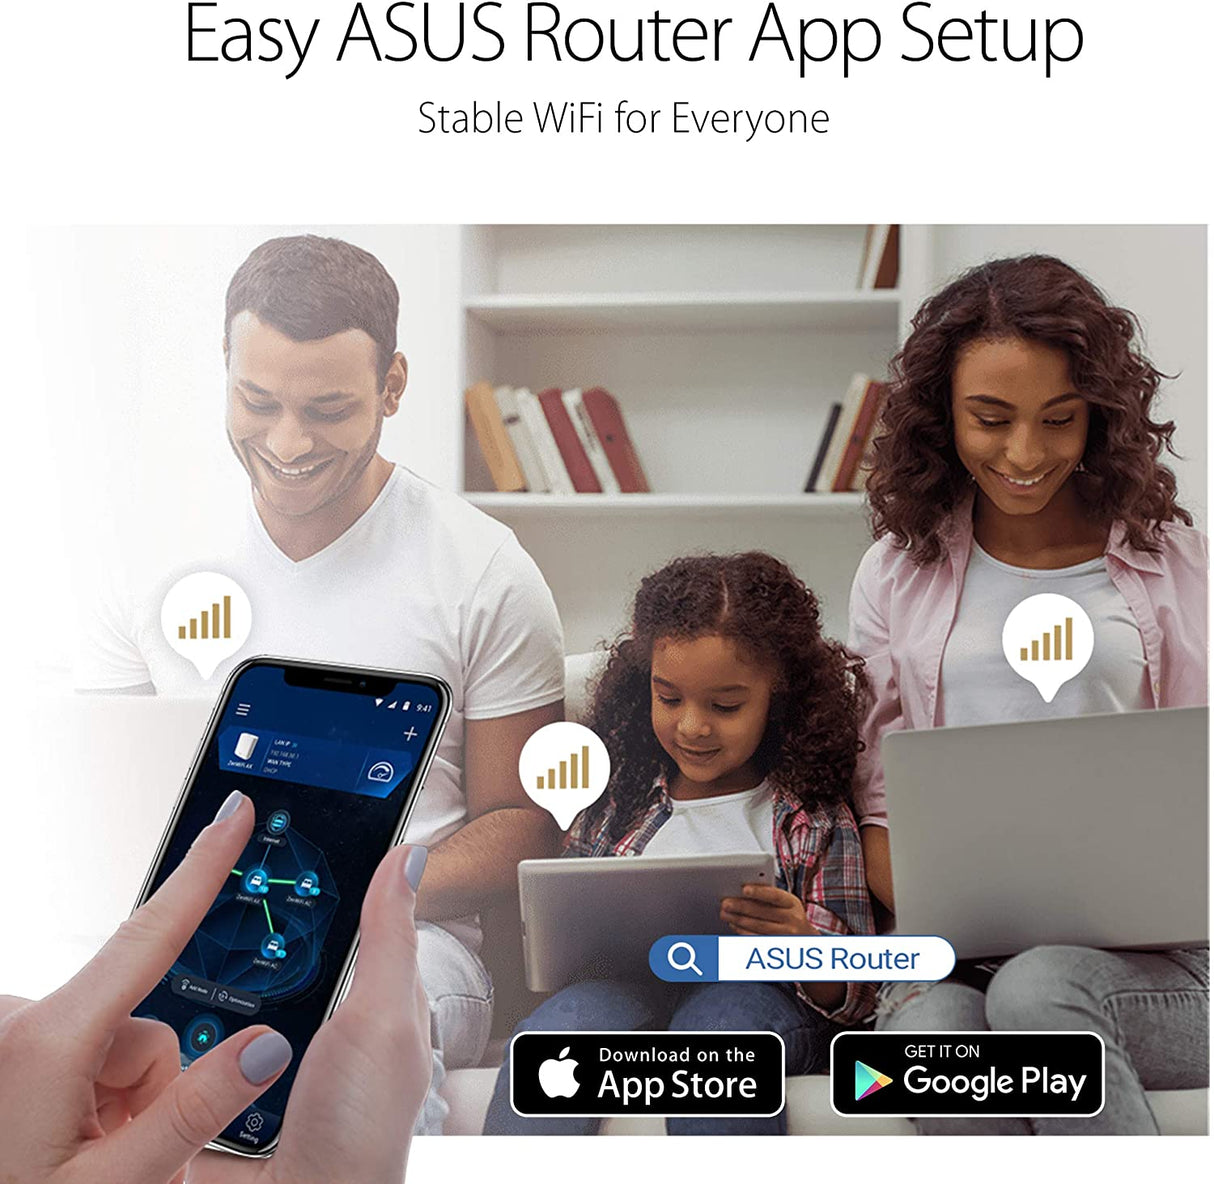 ASUS AC1900 WiFi Router (RT-AC67P) - Dual Band Wireless Internet Router, Easy Setup, VPN, Parental Control, AiRadar Beamforming Technology extends Speed, Stability &amp; Coverage, MU-MIMO